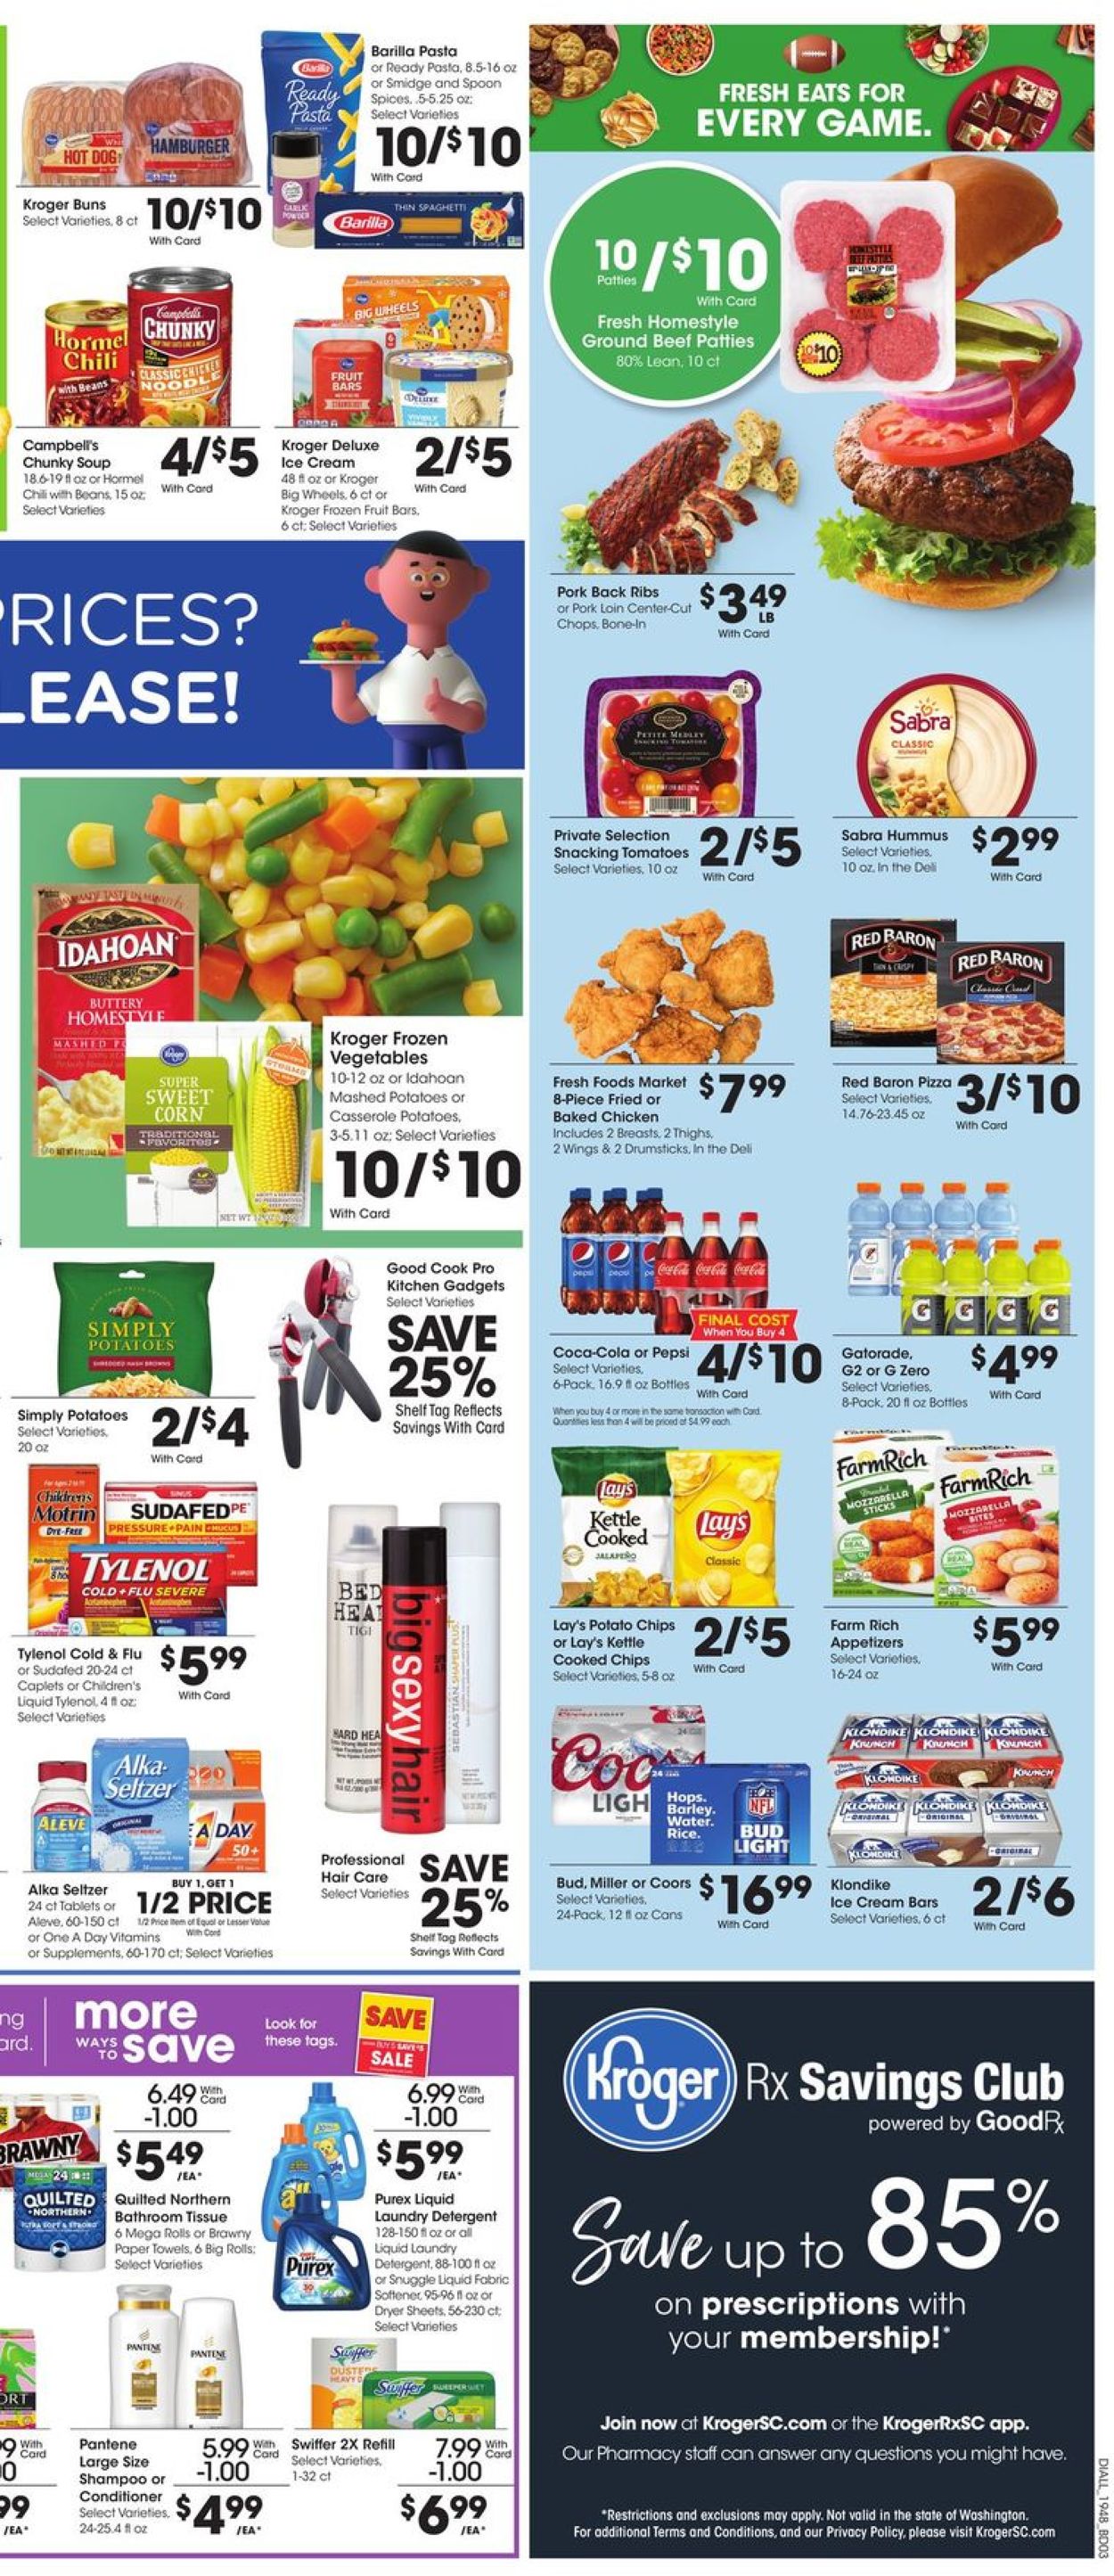 Dillons Current weekly ad 01/01 - 01/07/2020 [6] - frequent-ads.com